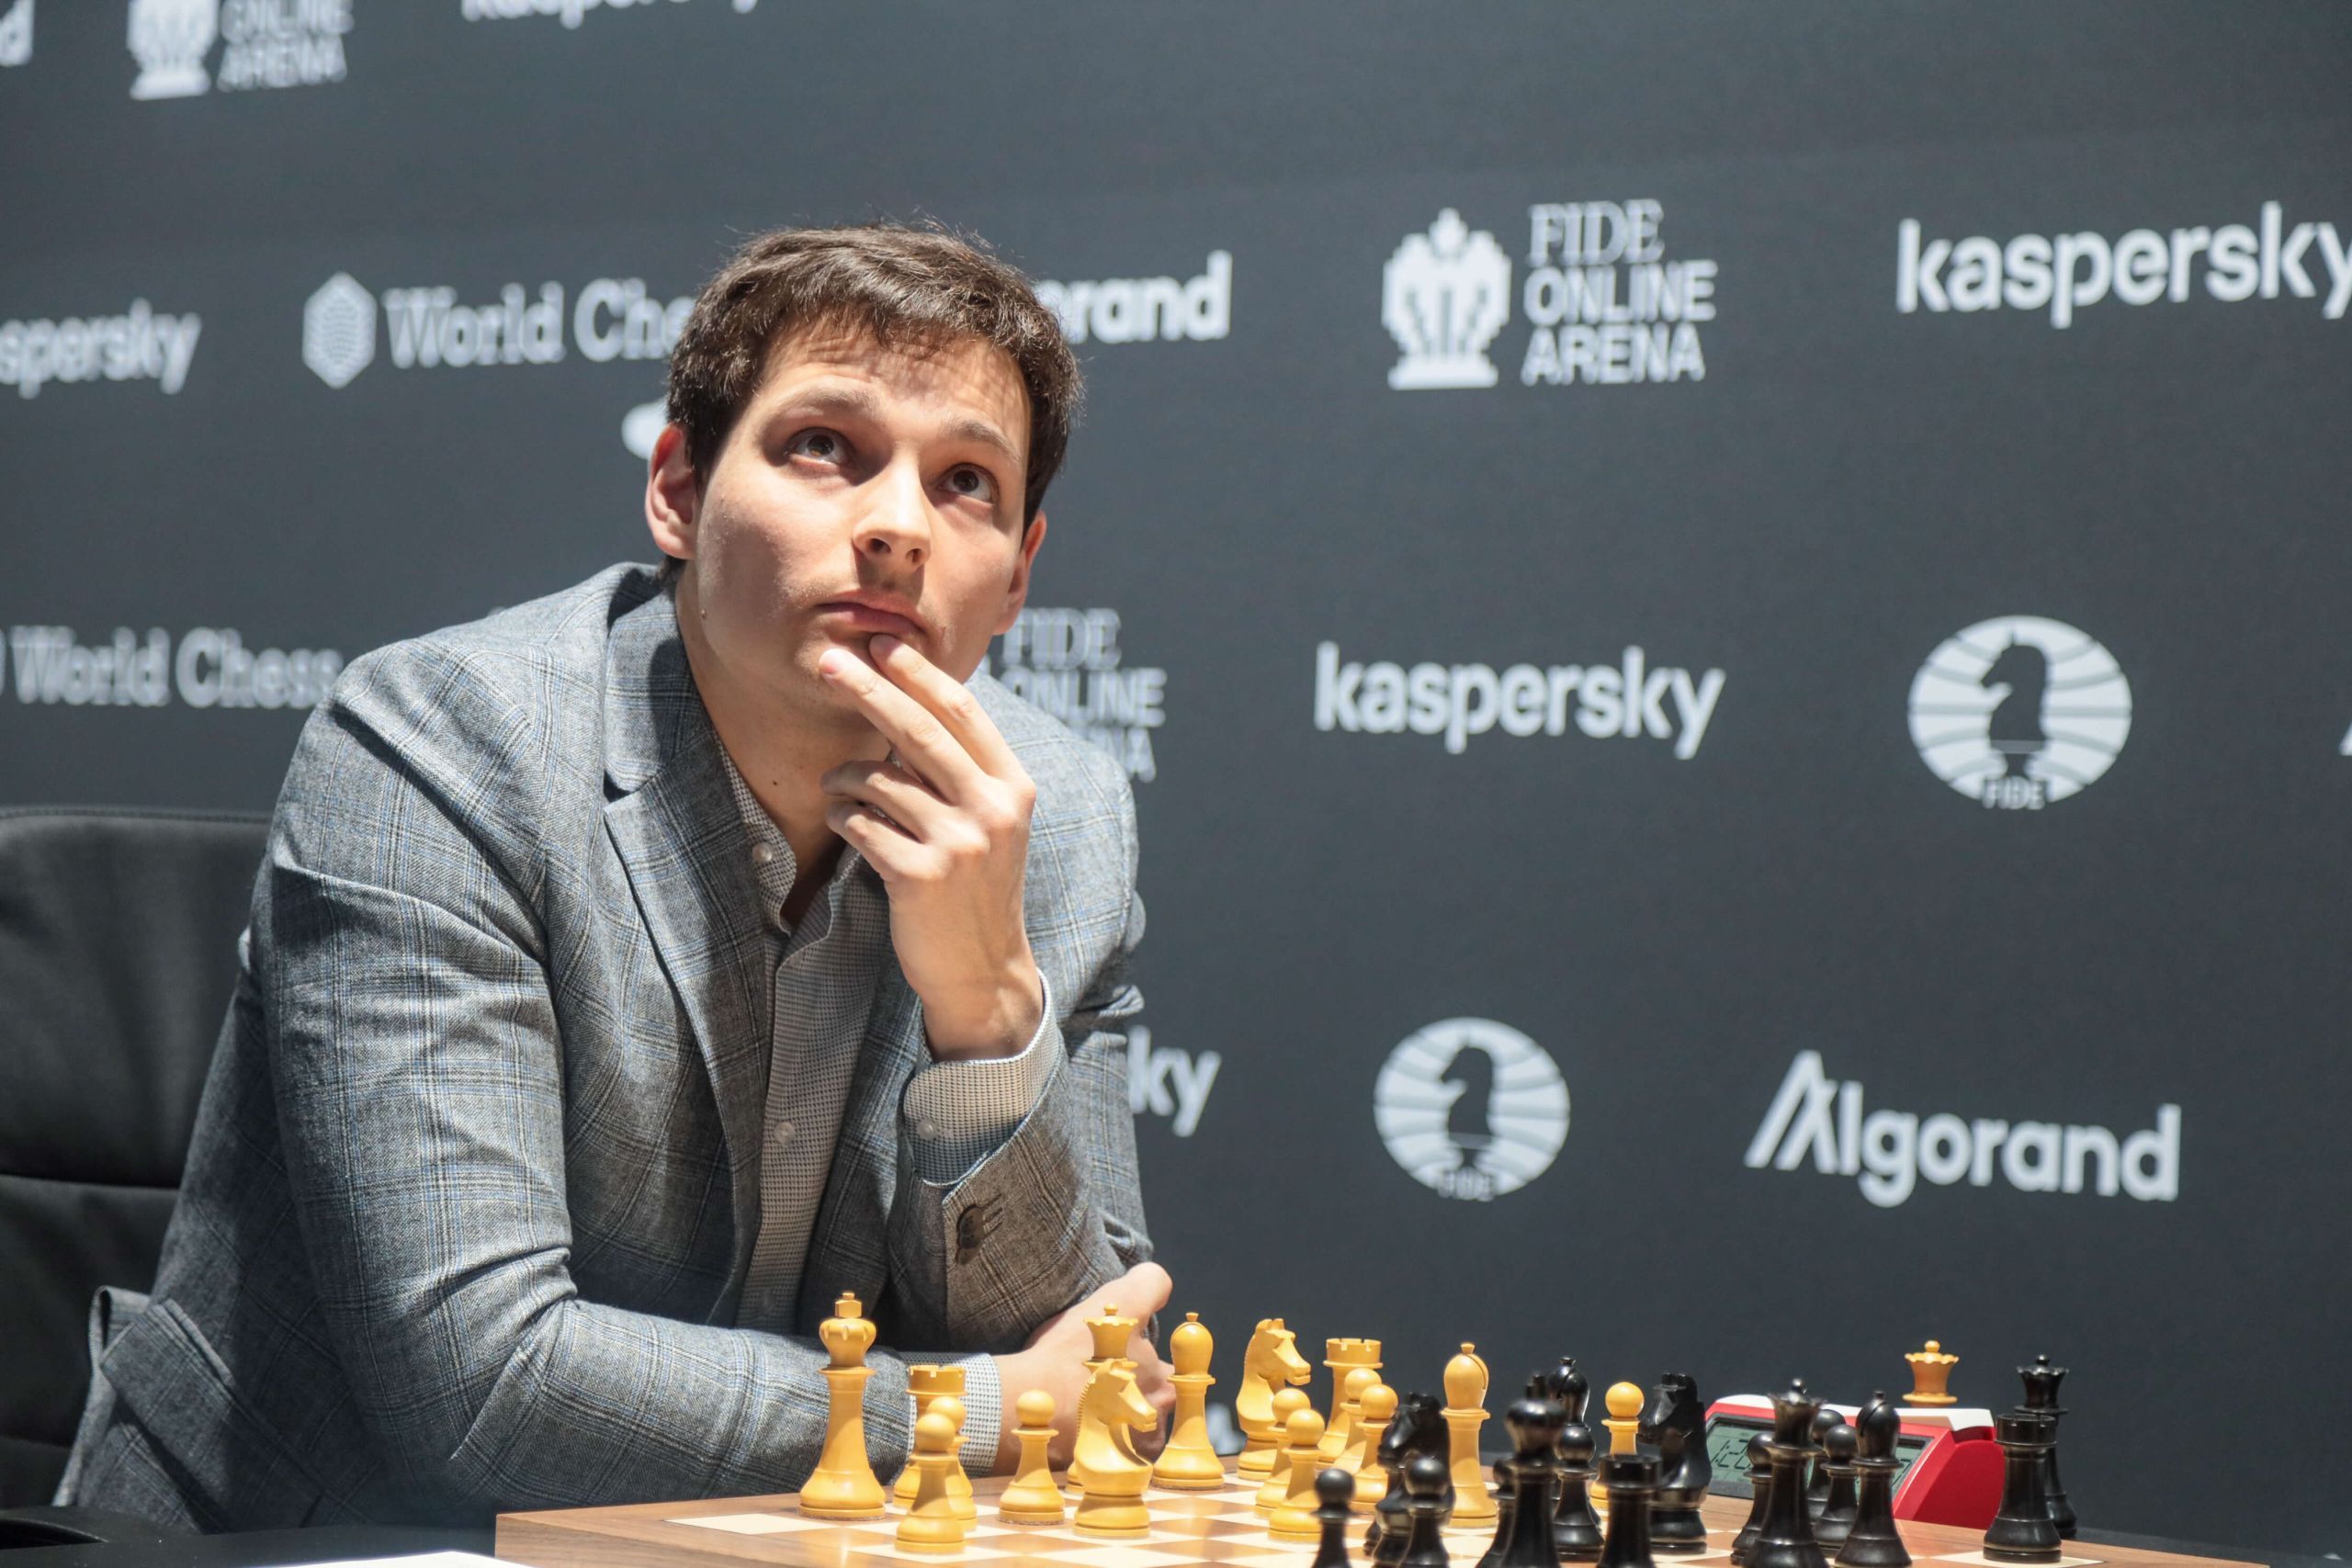 FIDE - International Chess Federation - The FIDE rating list for March 2022  is out. Levon Aronian gained 13 points from the Berlin #FIDEgrandprix;  combined with an 11-point loss by Caruana, this